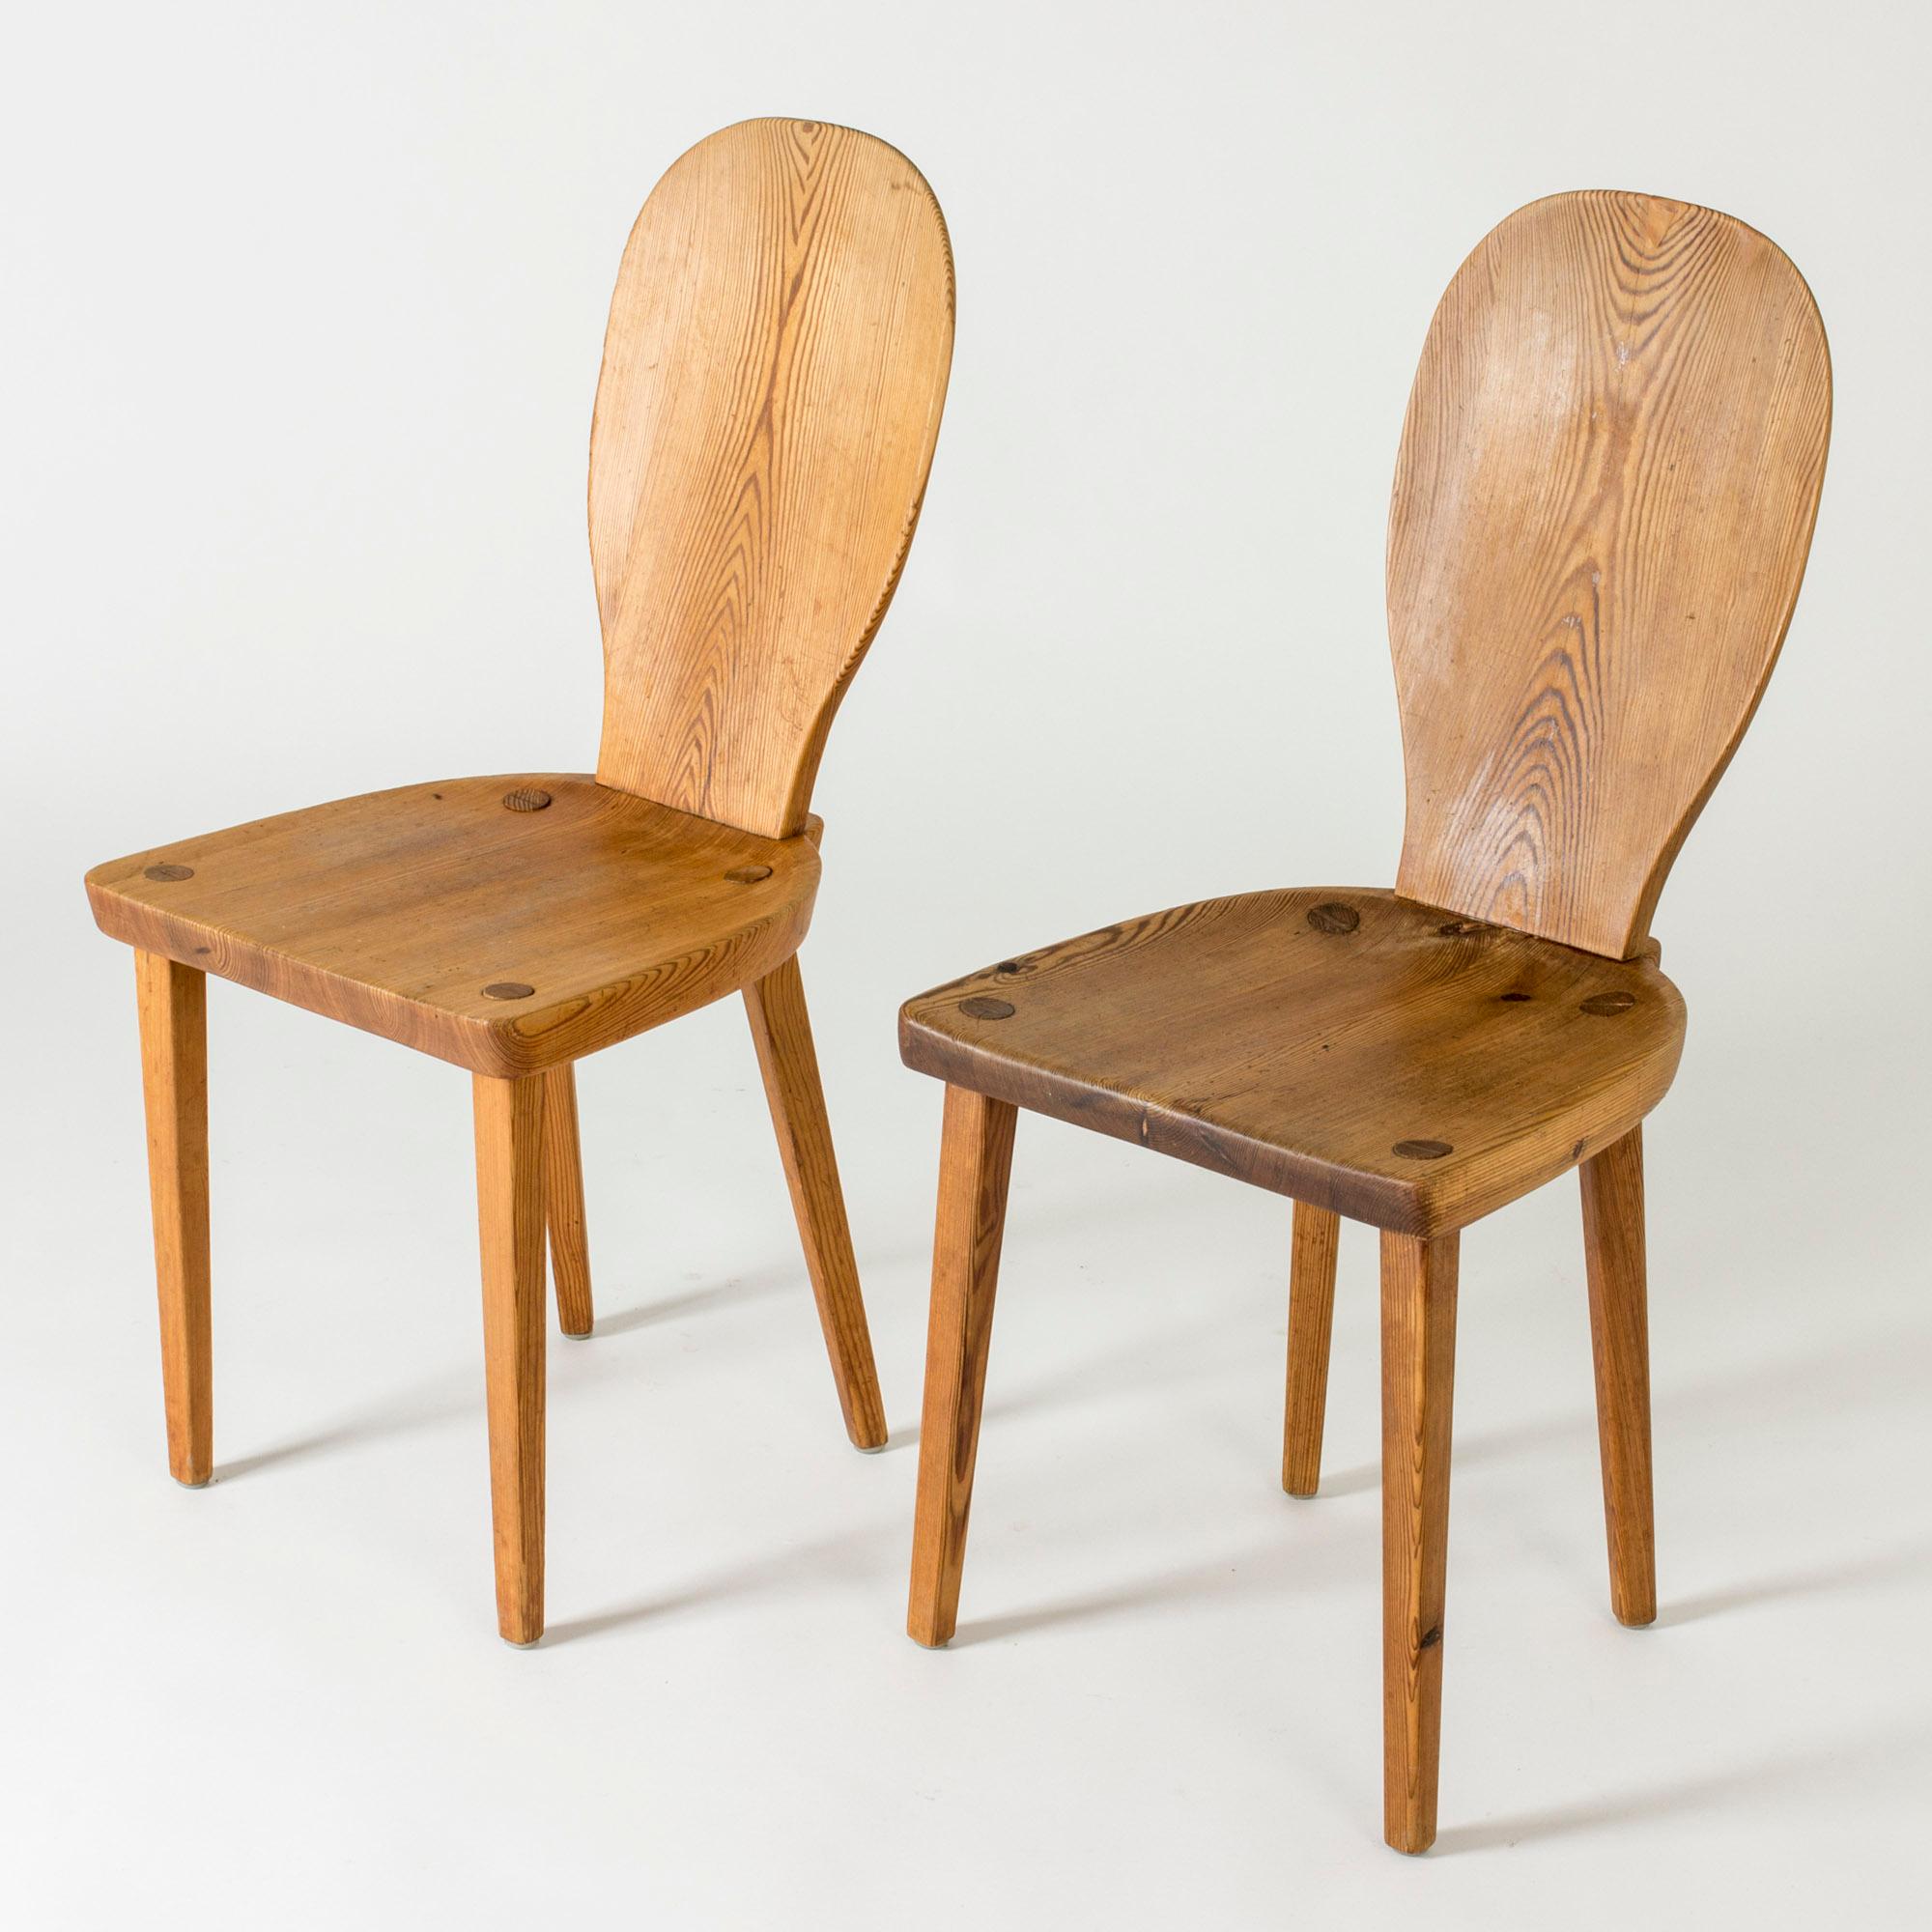 Pair of “Skedblad” dining or side chairs by Carl Malmsten, made from teak. Designed in 1931. Clean form with rustic woodgrain.